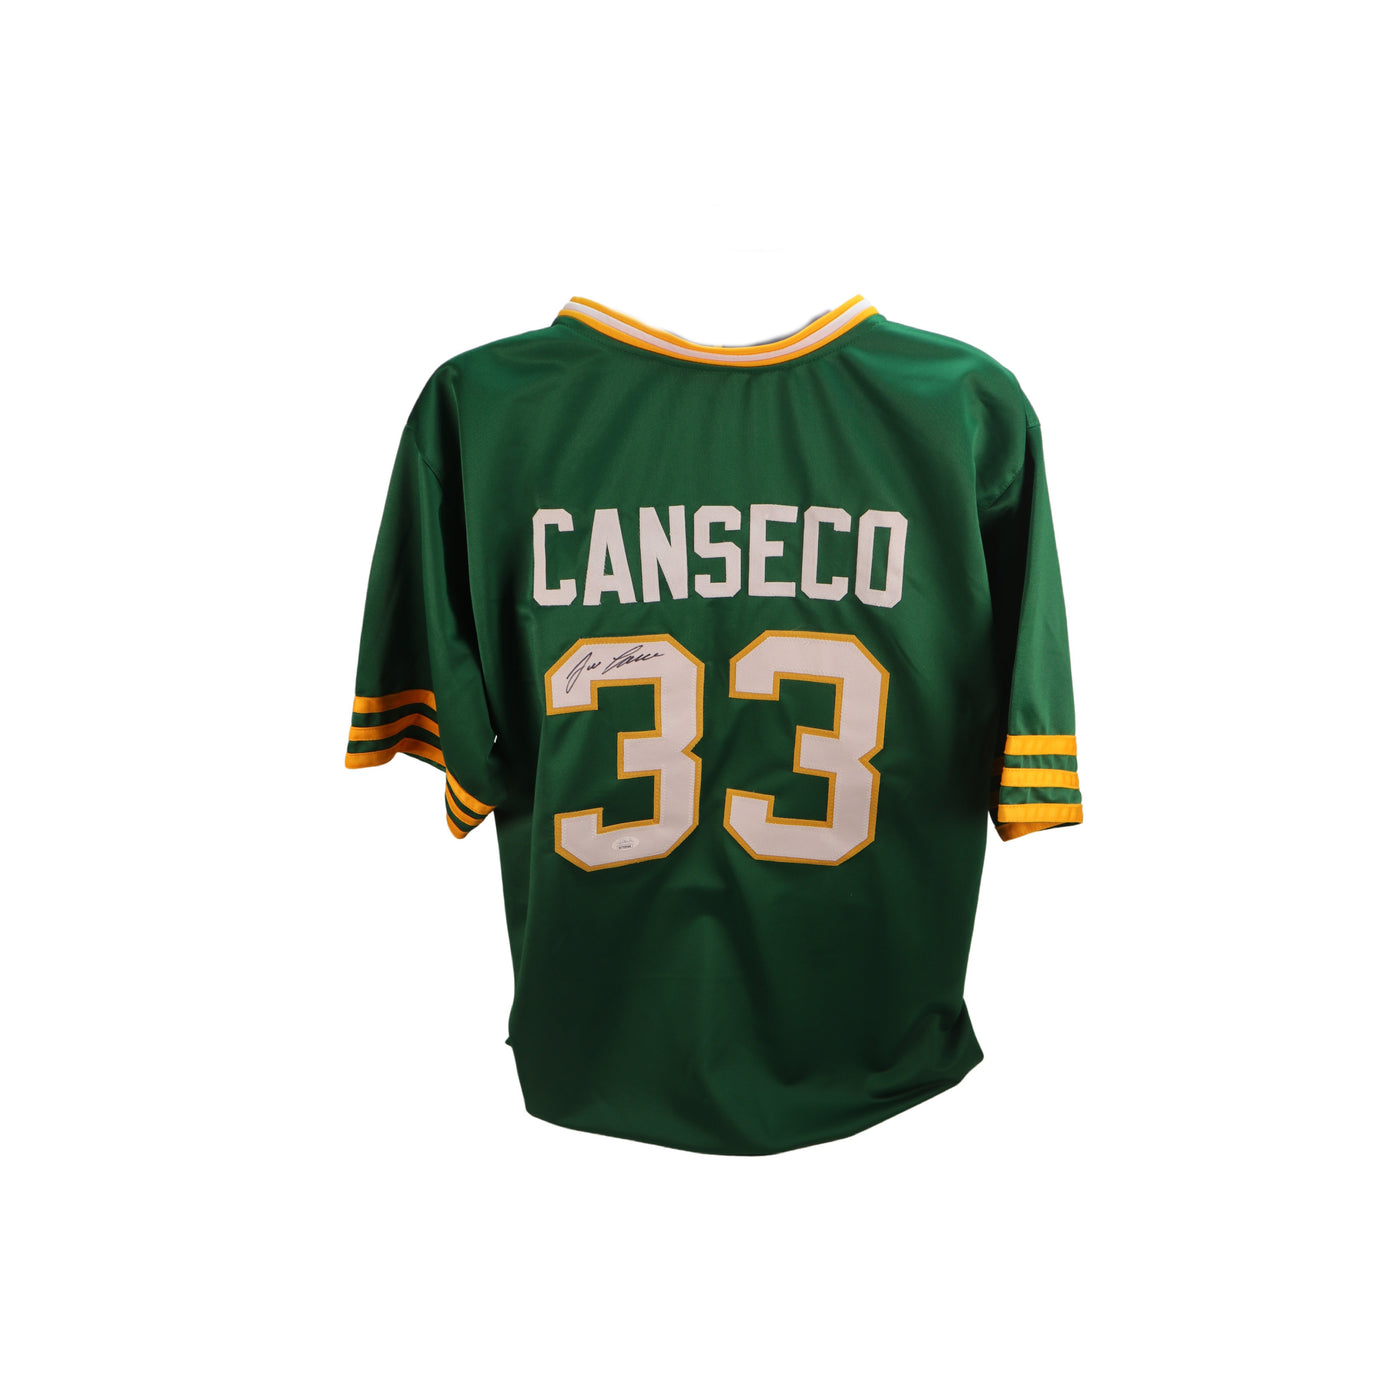 Jose Canseco signed jersey JSA Oakland Athletics Autographed